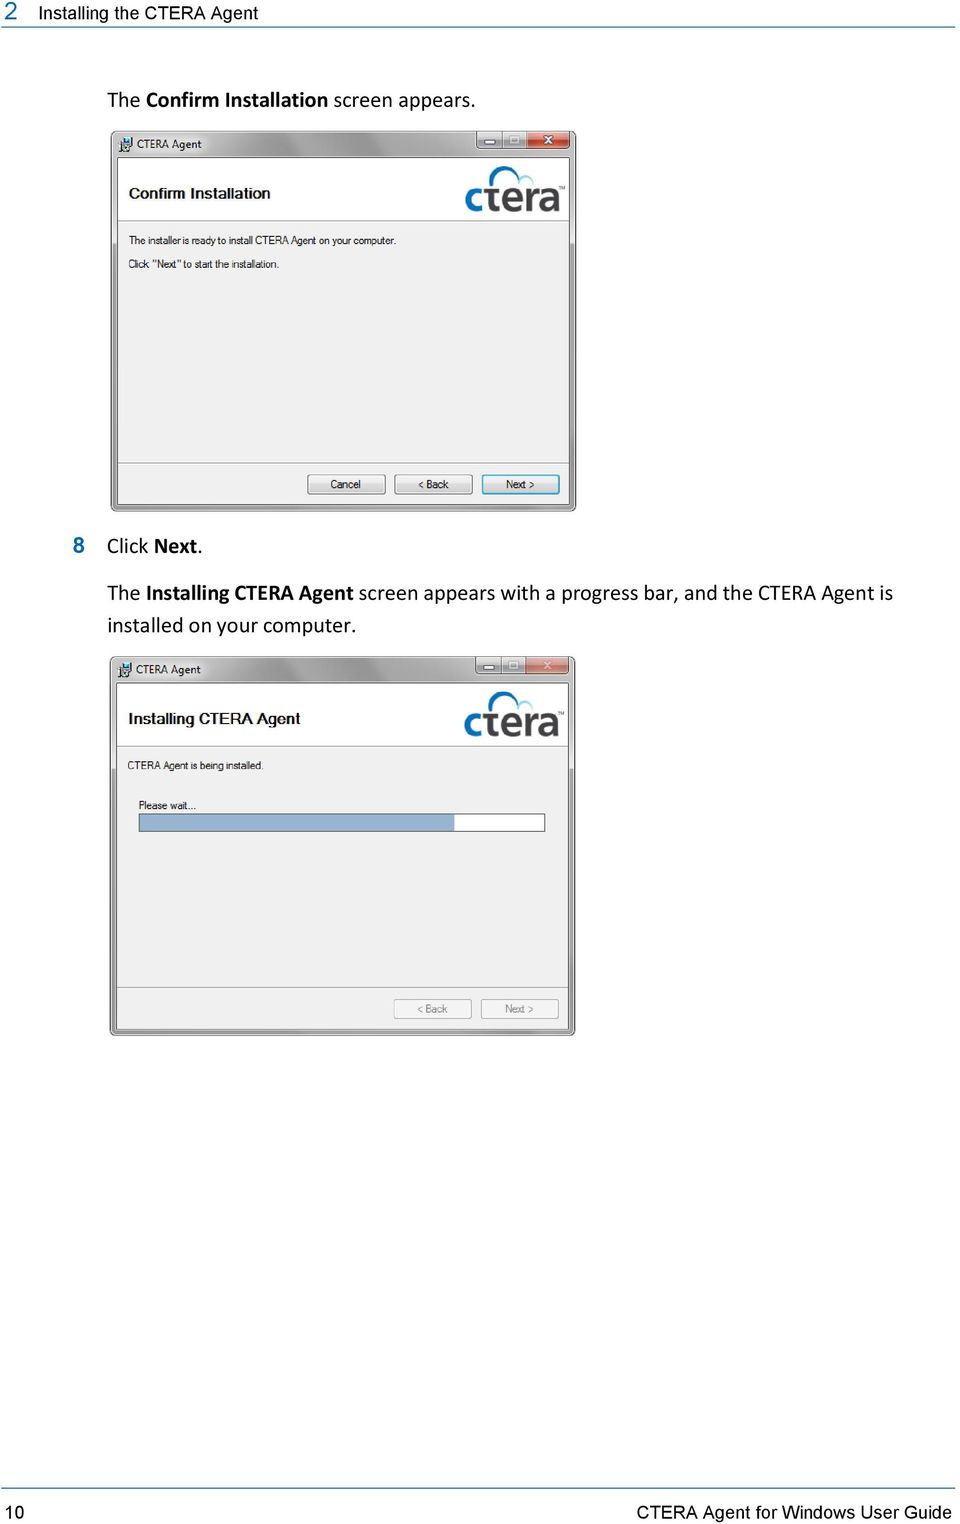 The Installing CTERA Agent screen appears with a progress